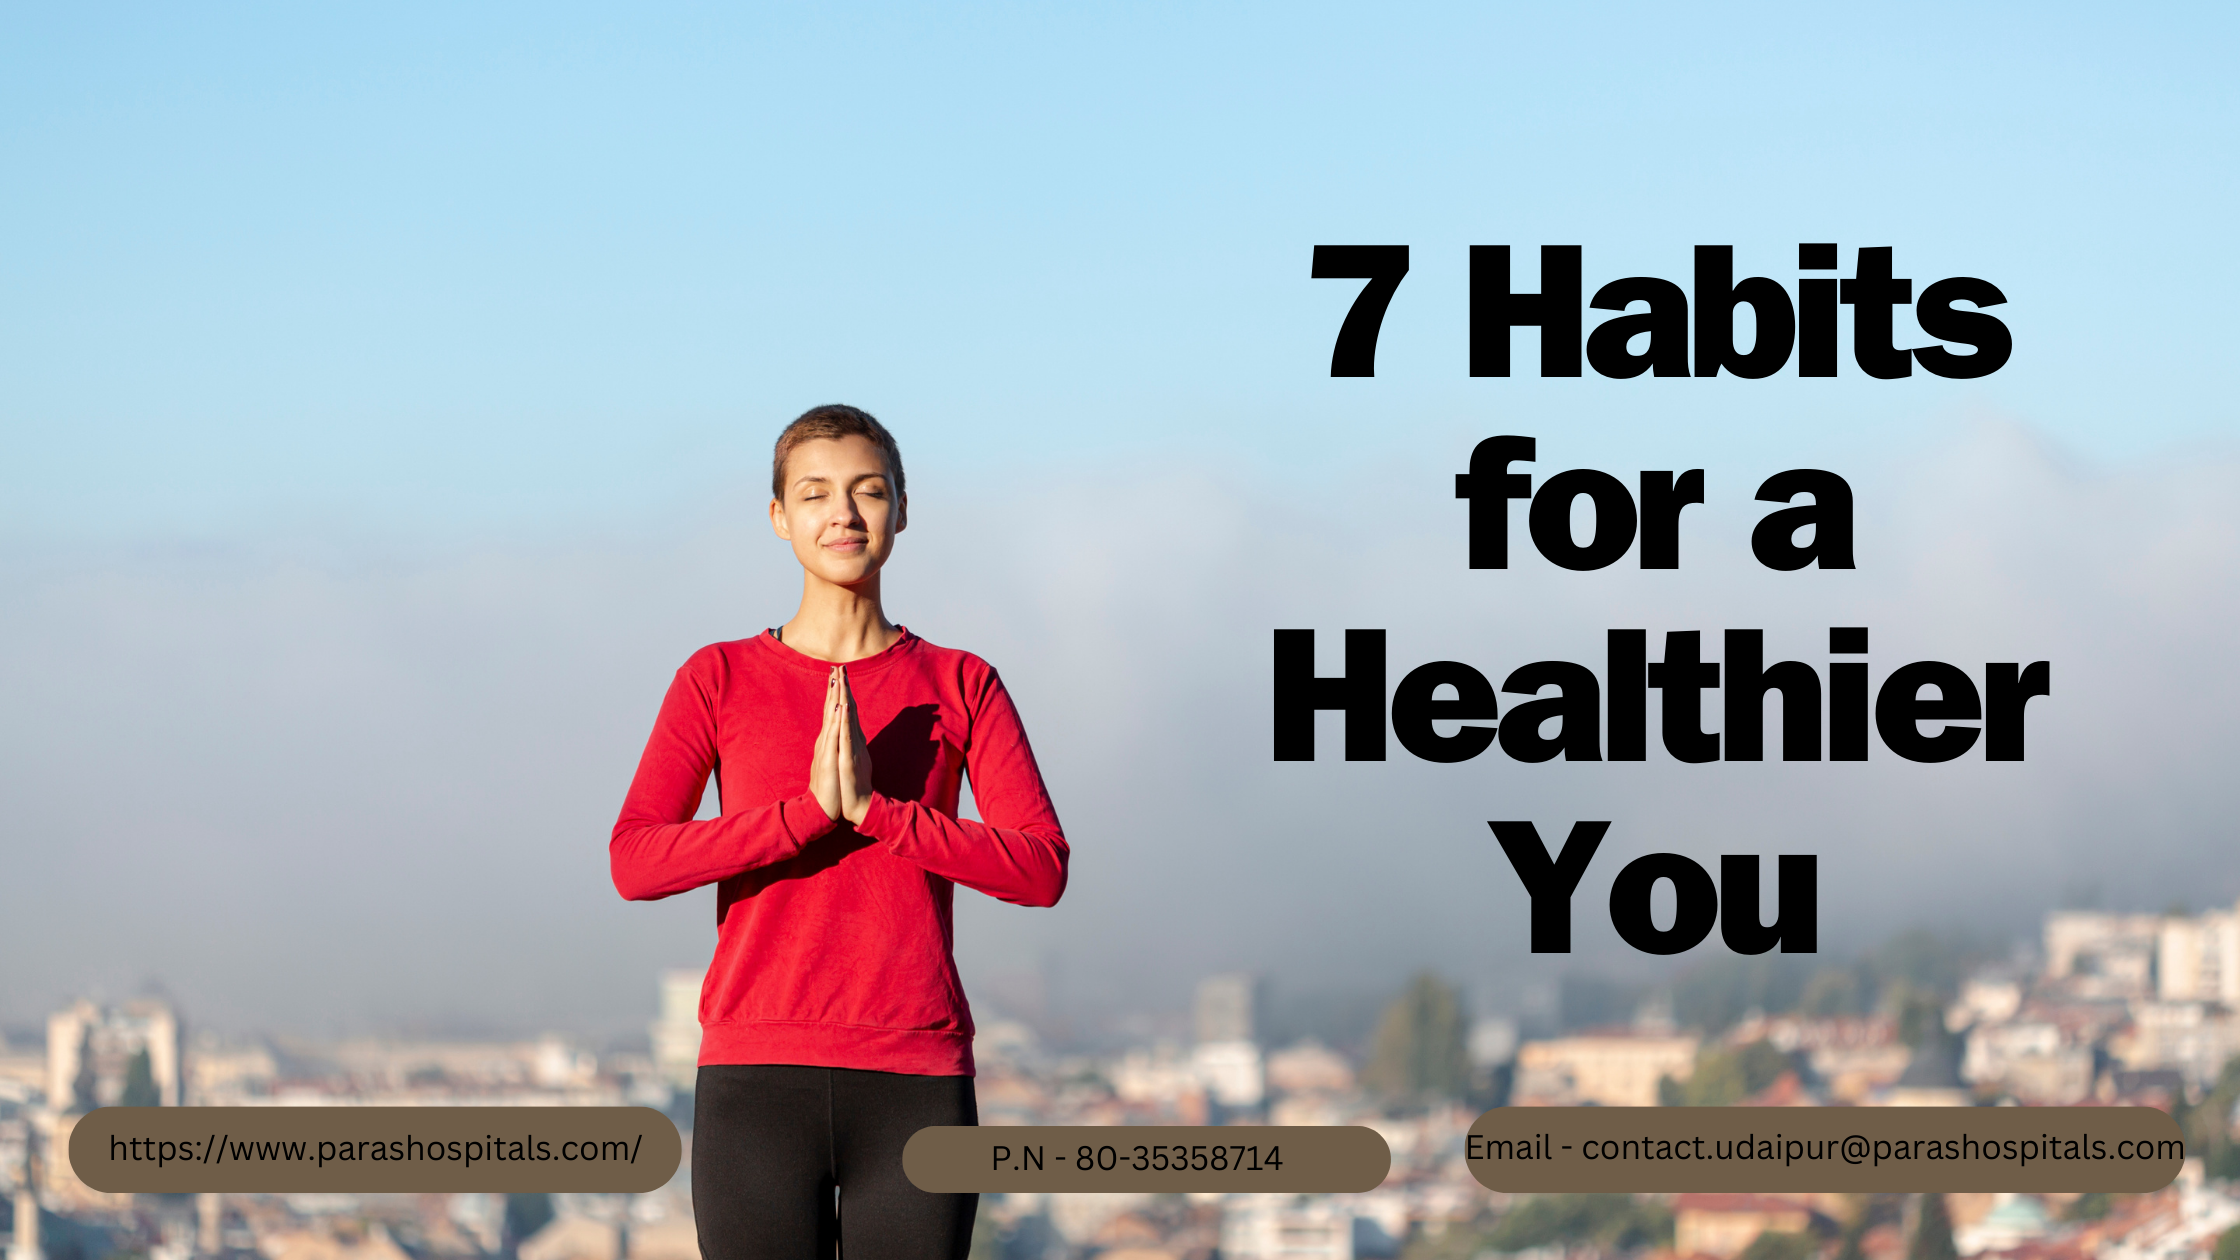 7 Habits for a Healthier You